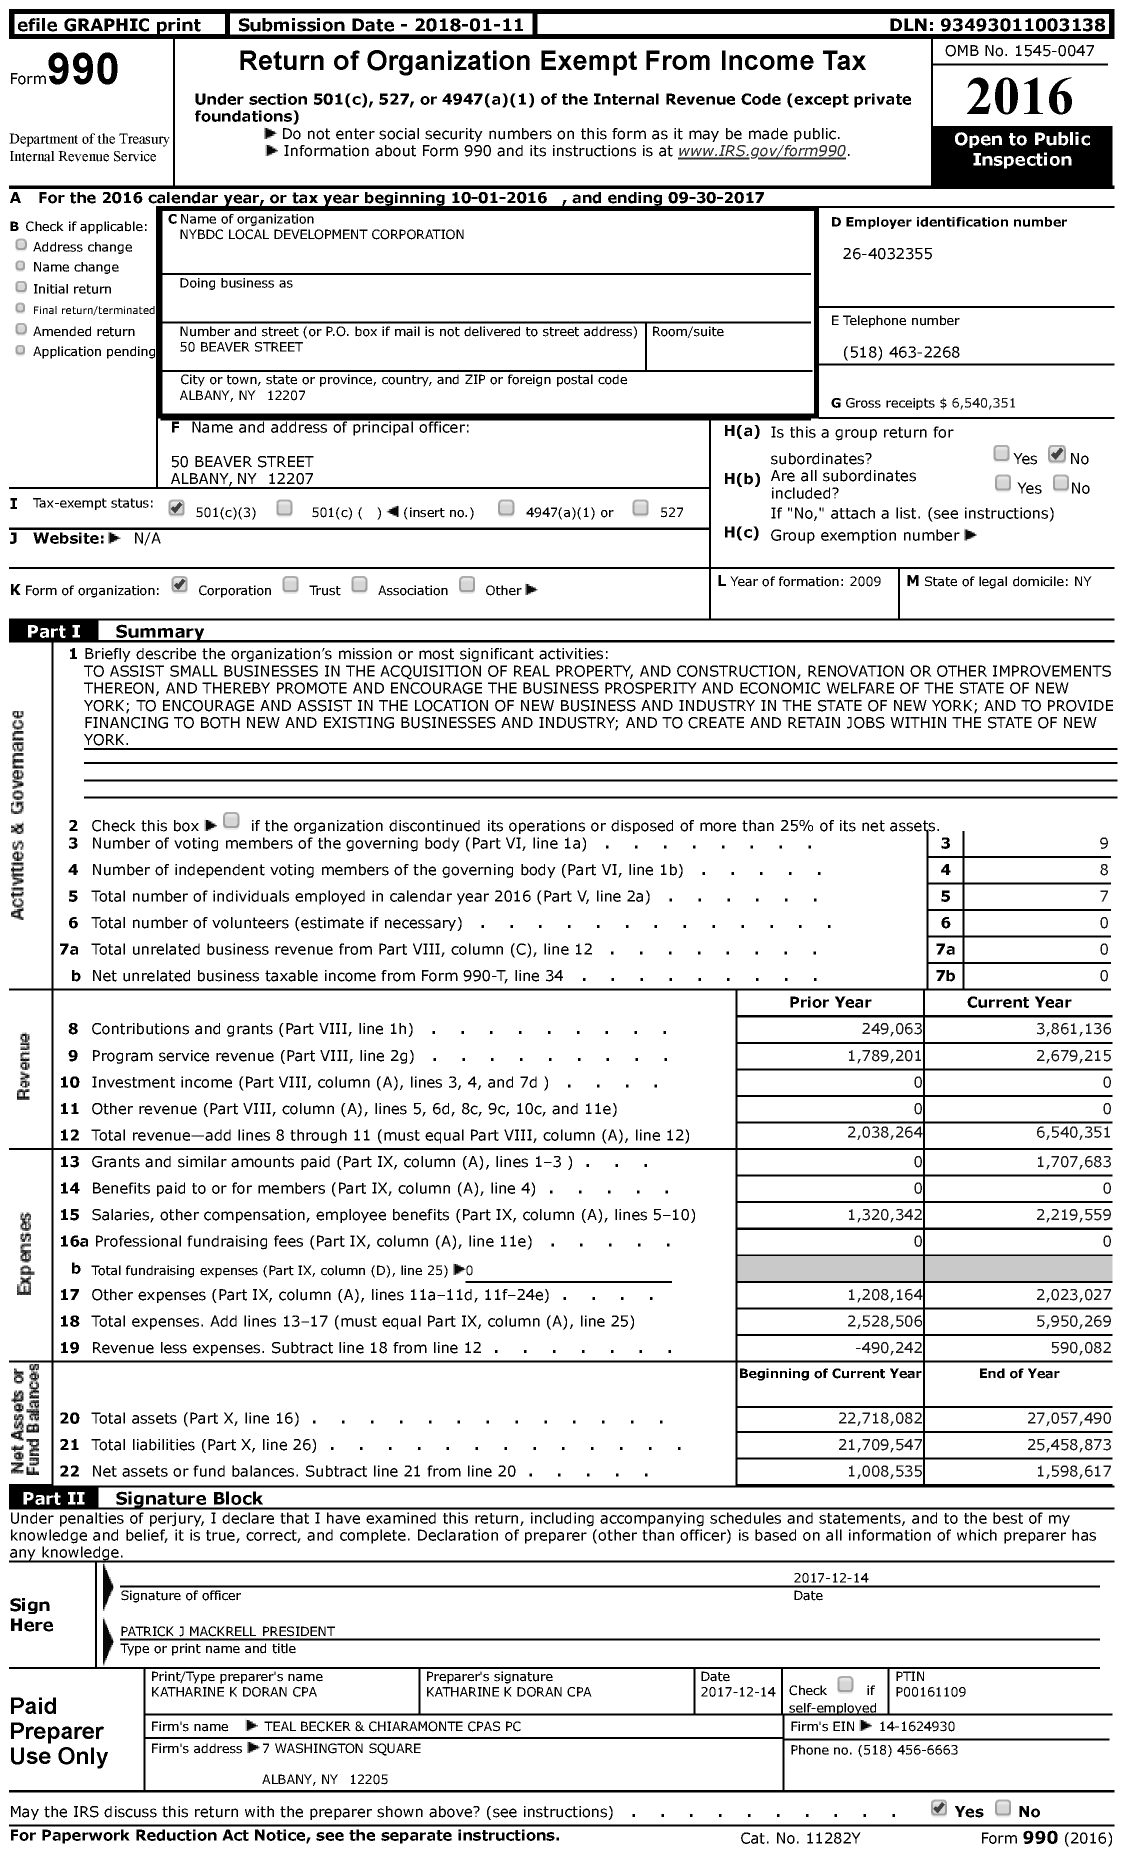 Image of first page of 2016 Form 990 for Nybdc Local Development Corporation